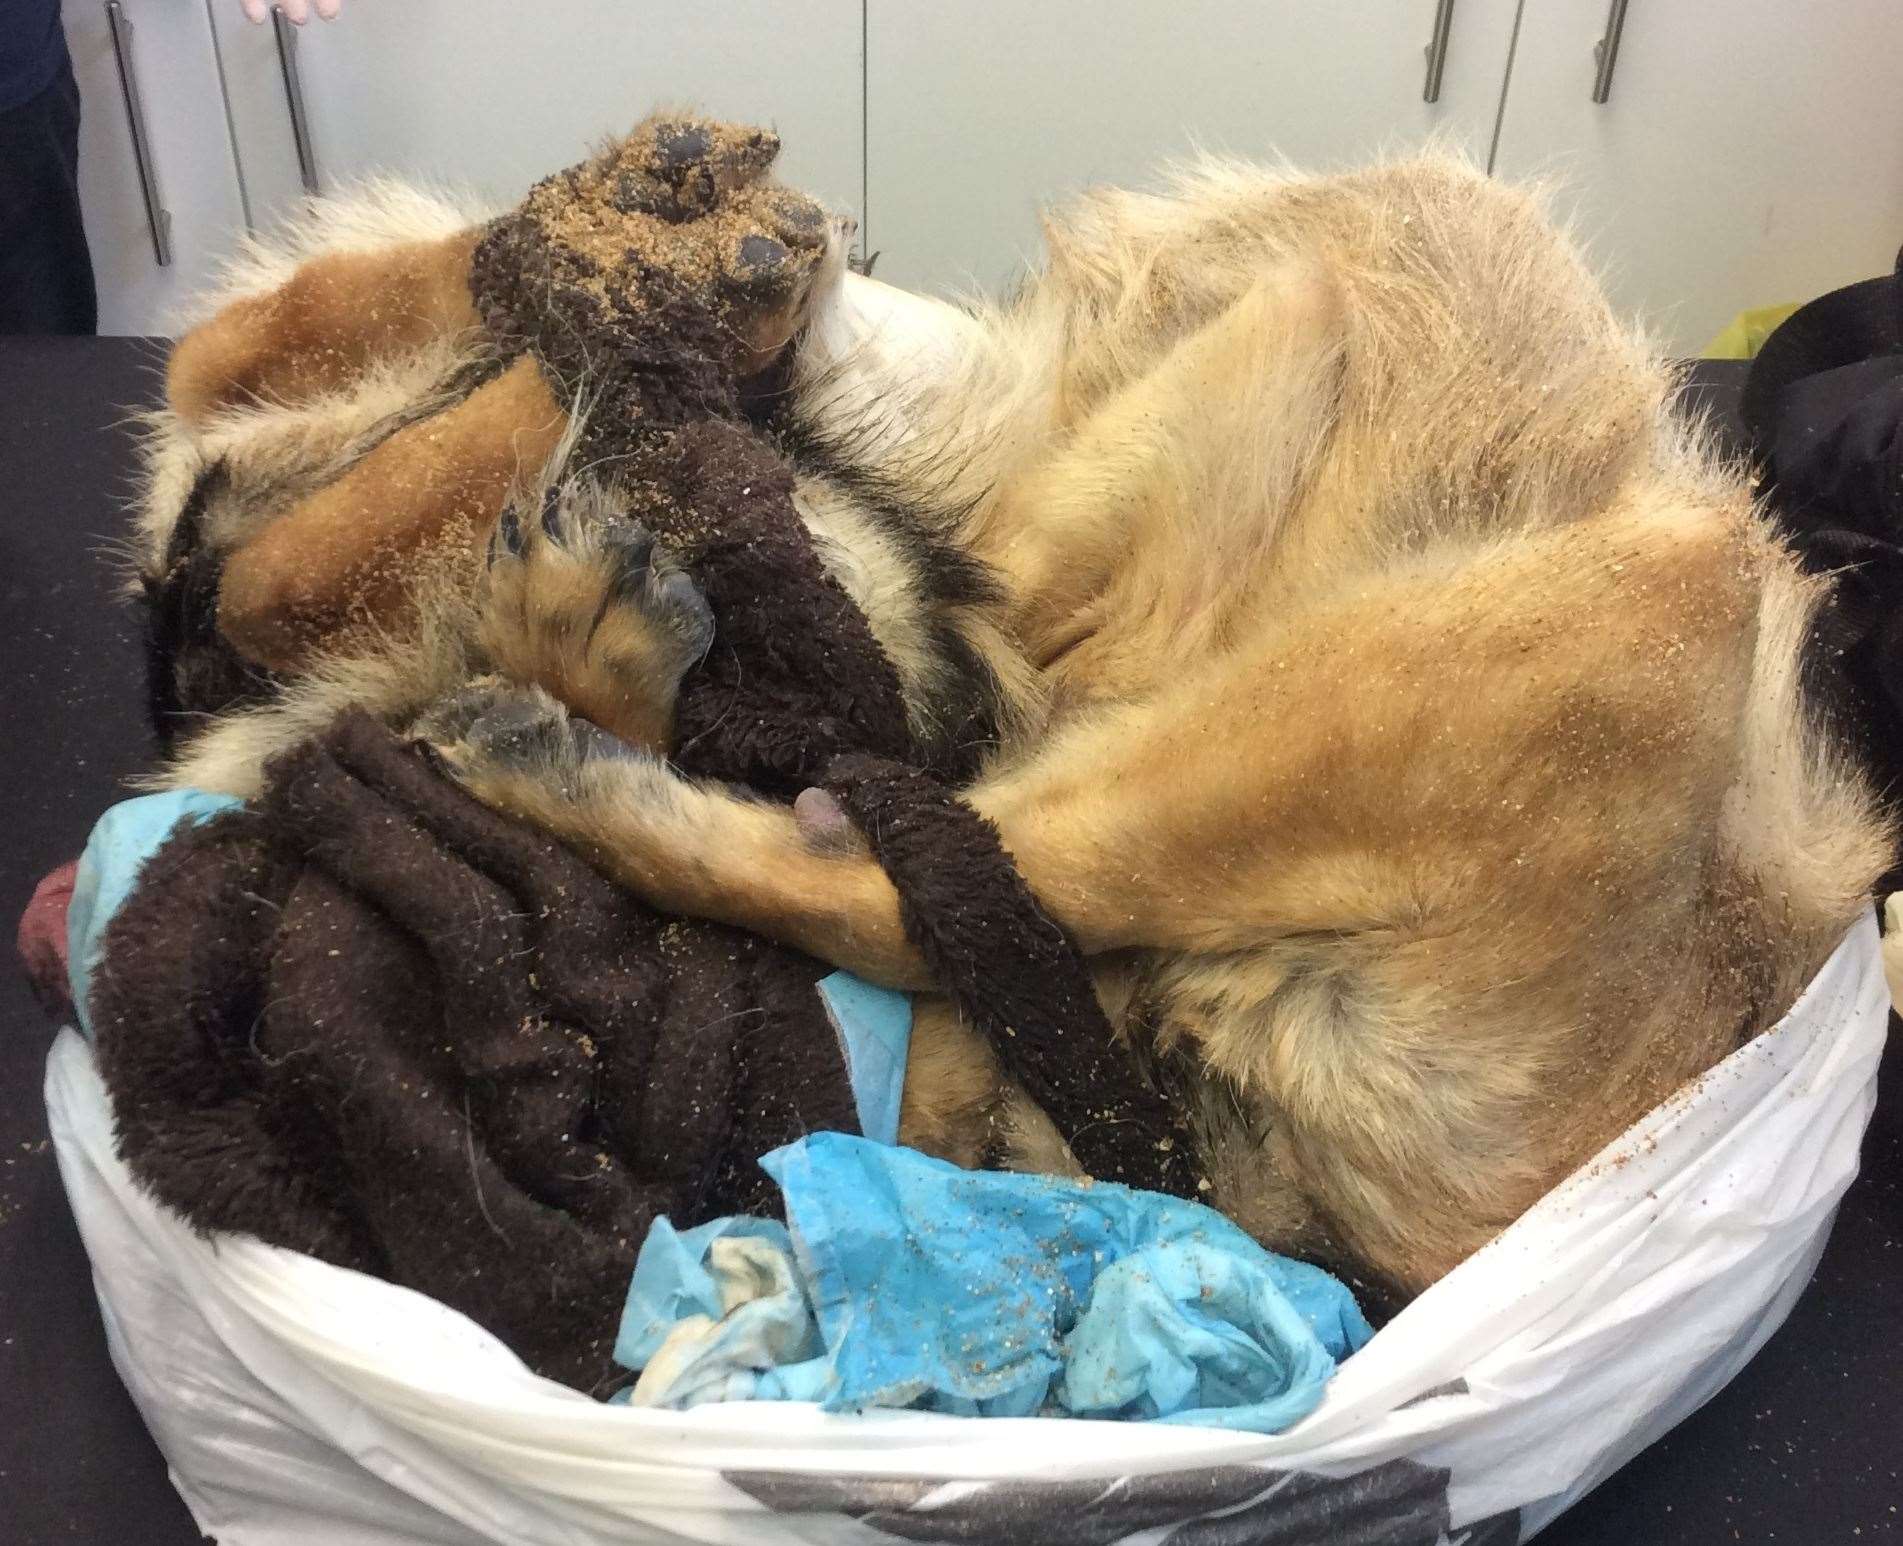 The RSPCA is now pleading for witnesses to come forward. Picture: RSPCA (13009013)